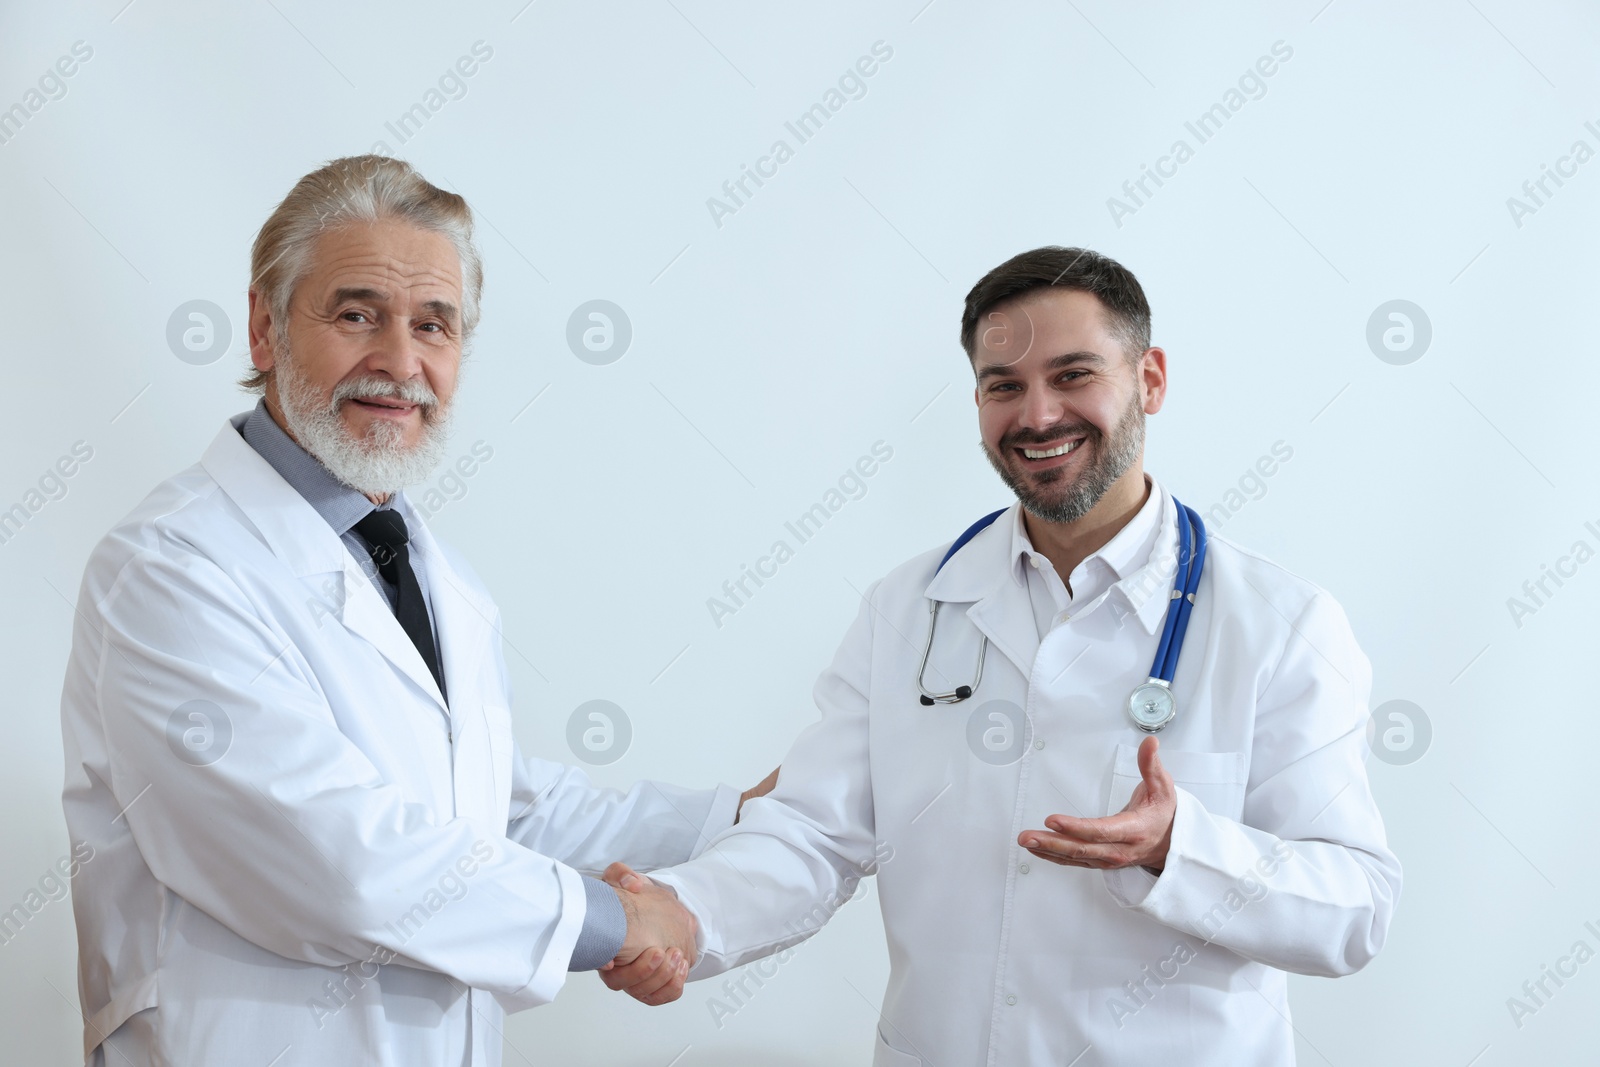 Photo of Doctors shaking hands on white background. Medical conference